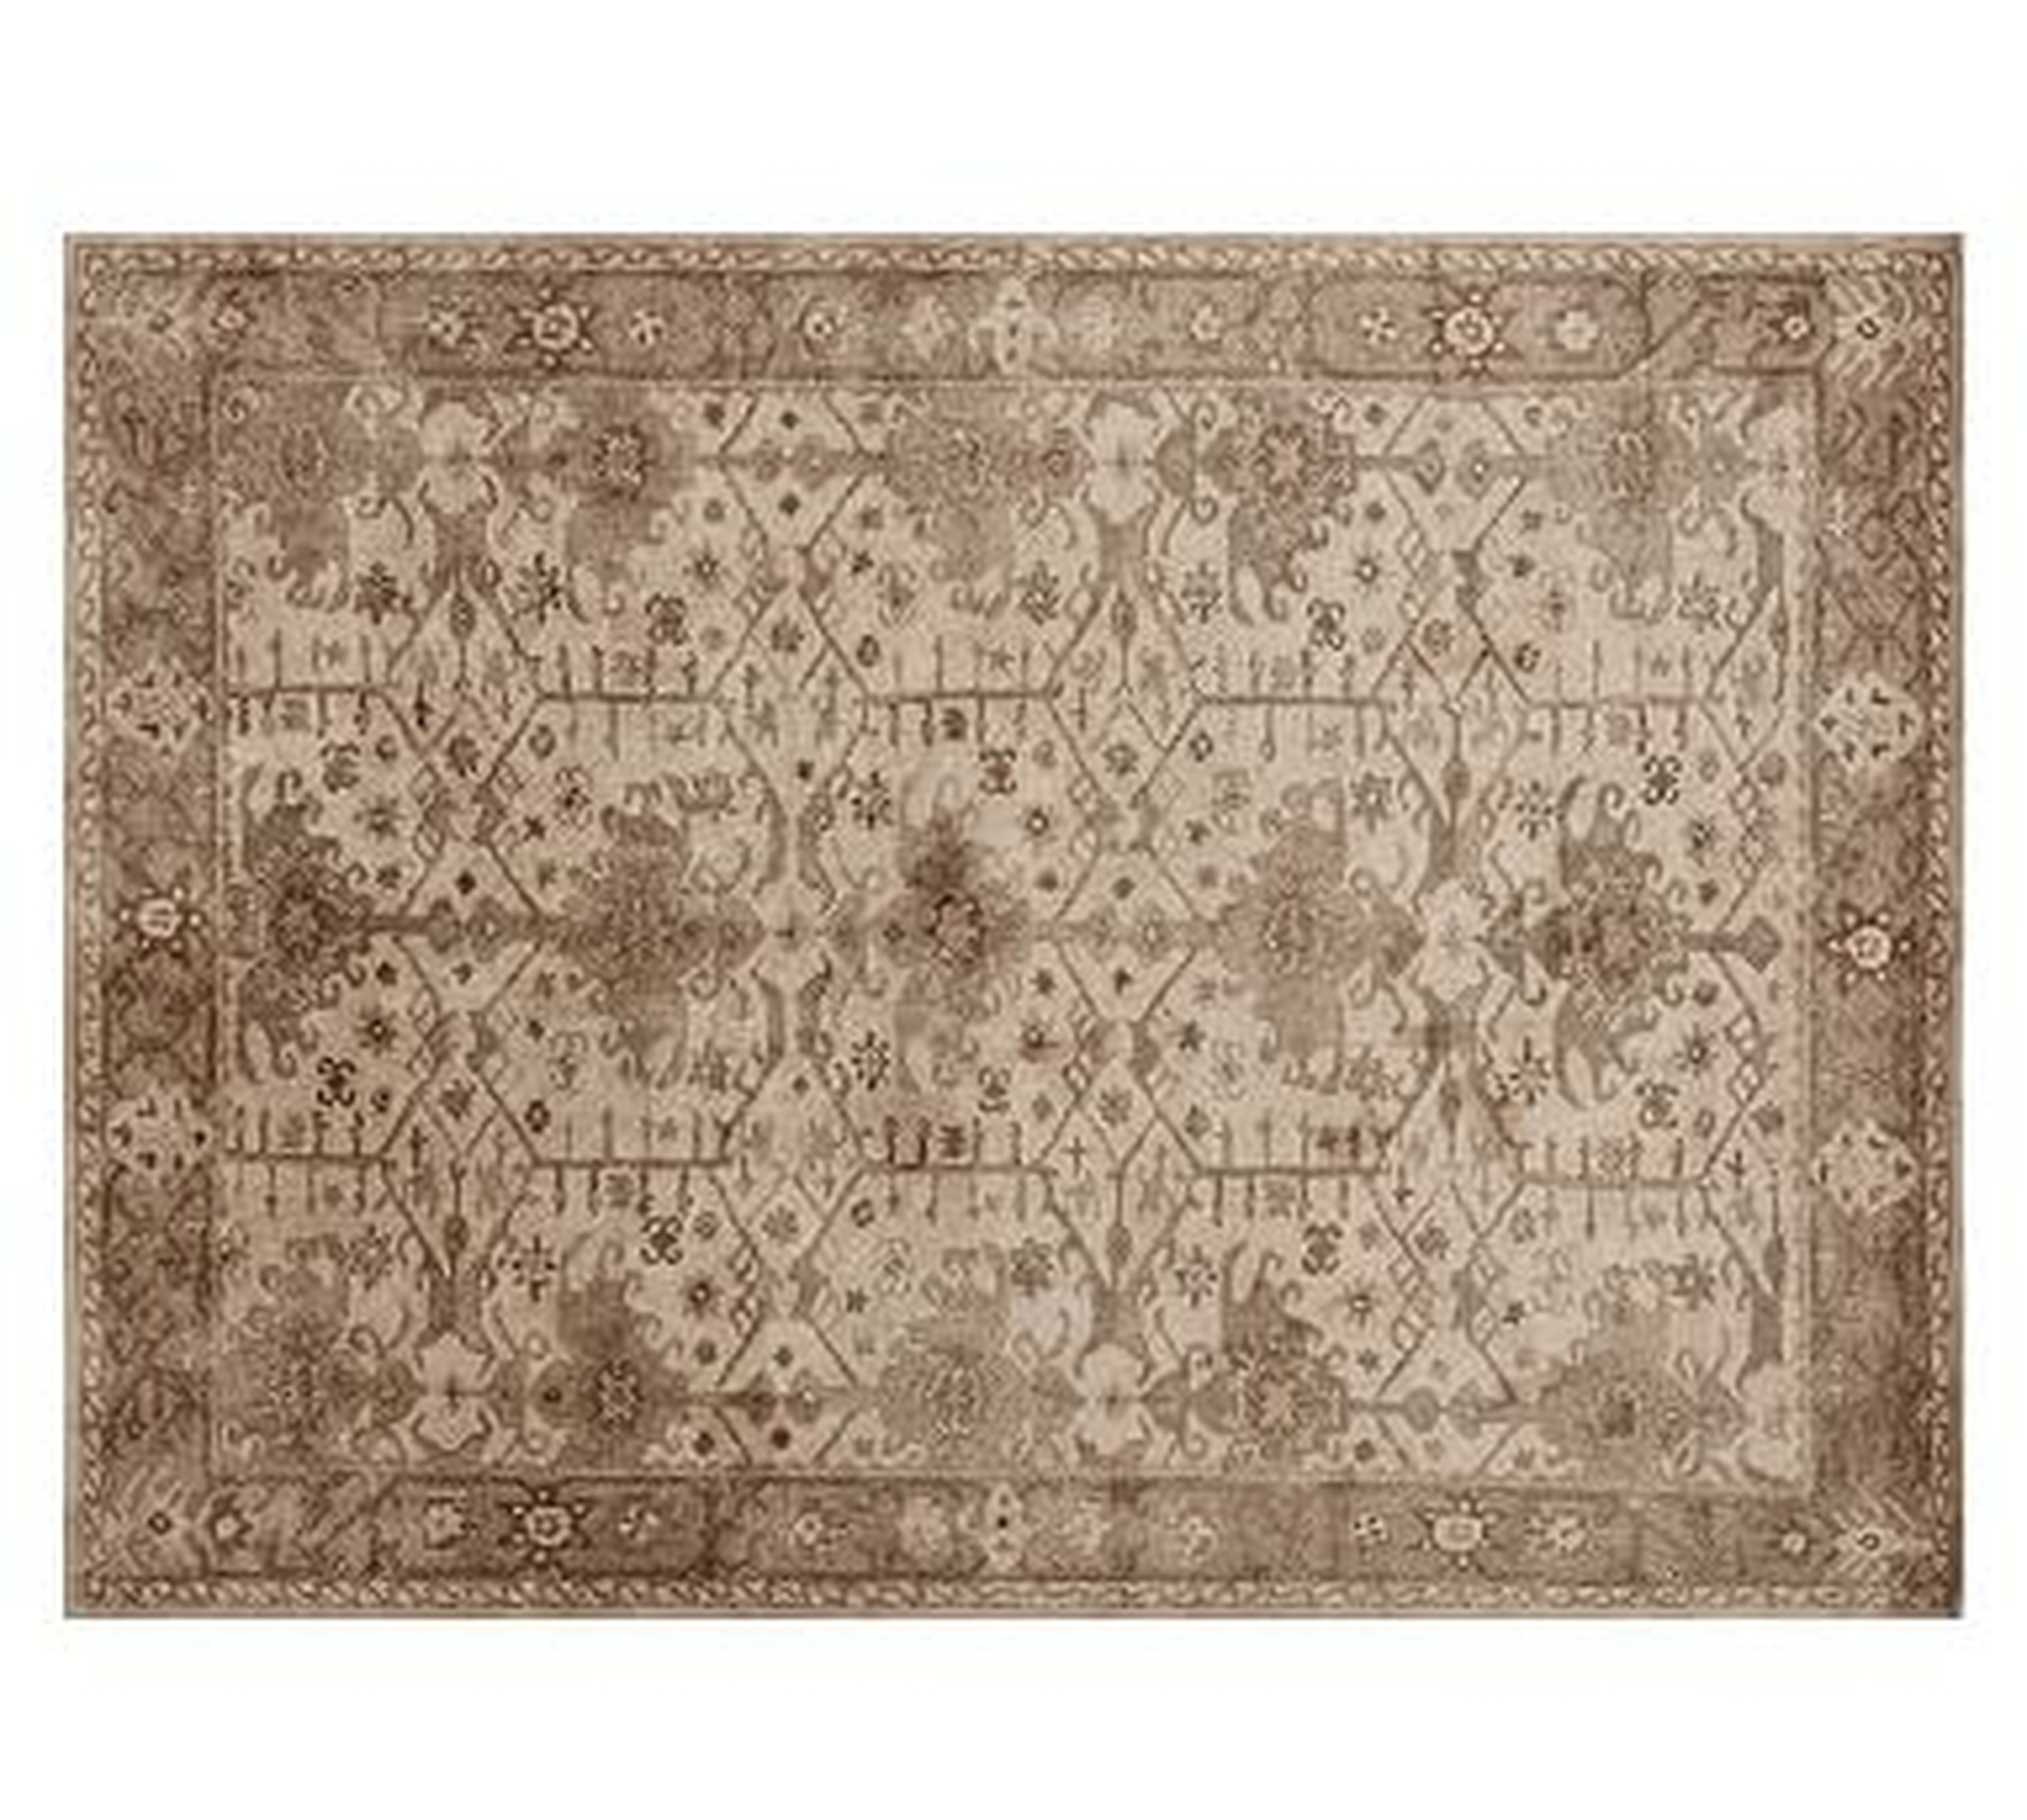 Channing Persian Rug, 8 x 10', Neutral - Pottery Barn